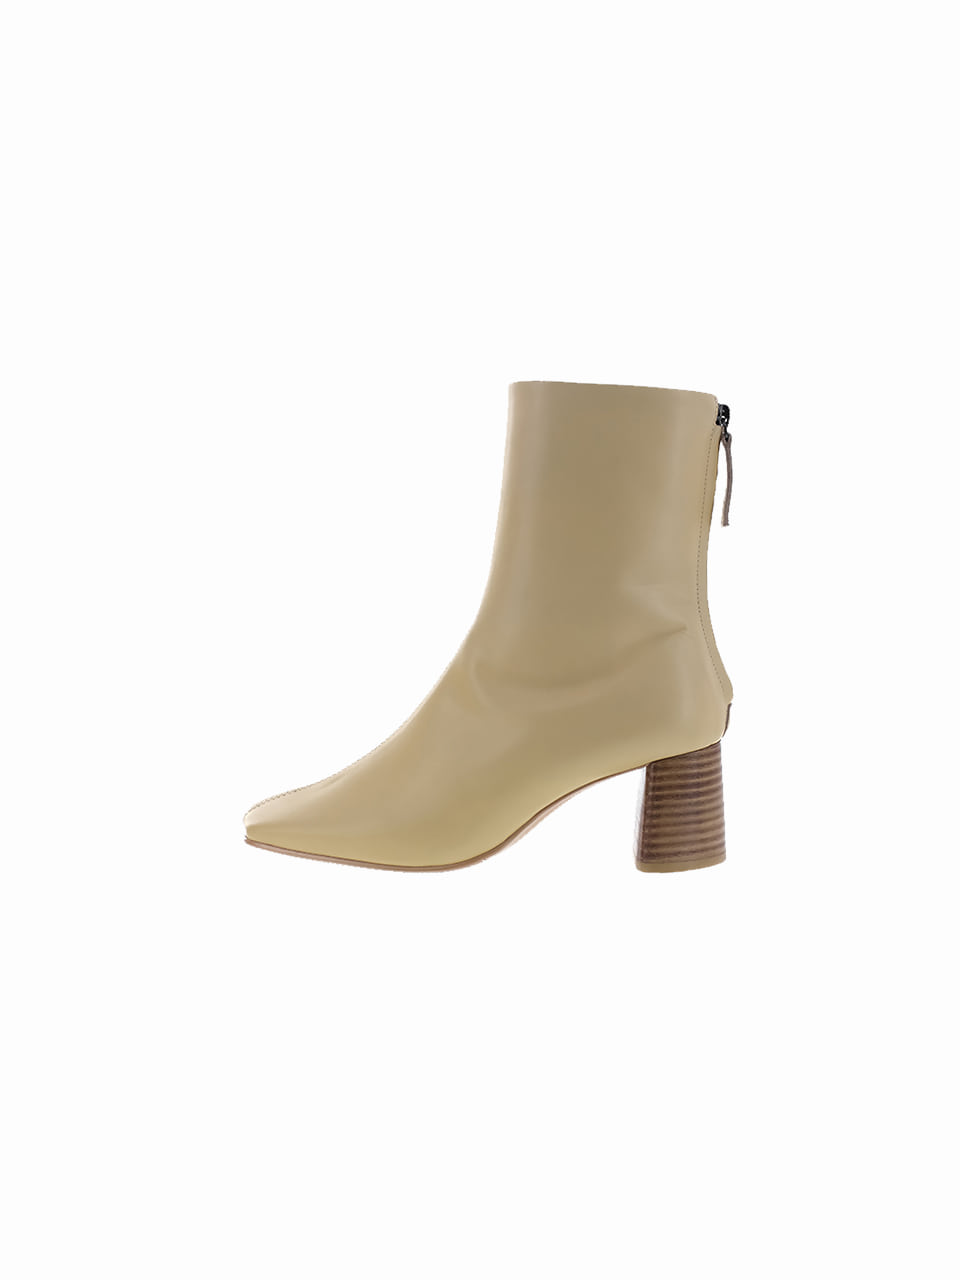 WQ middle boots_yellowbeige_20511